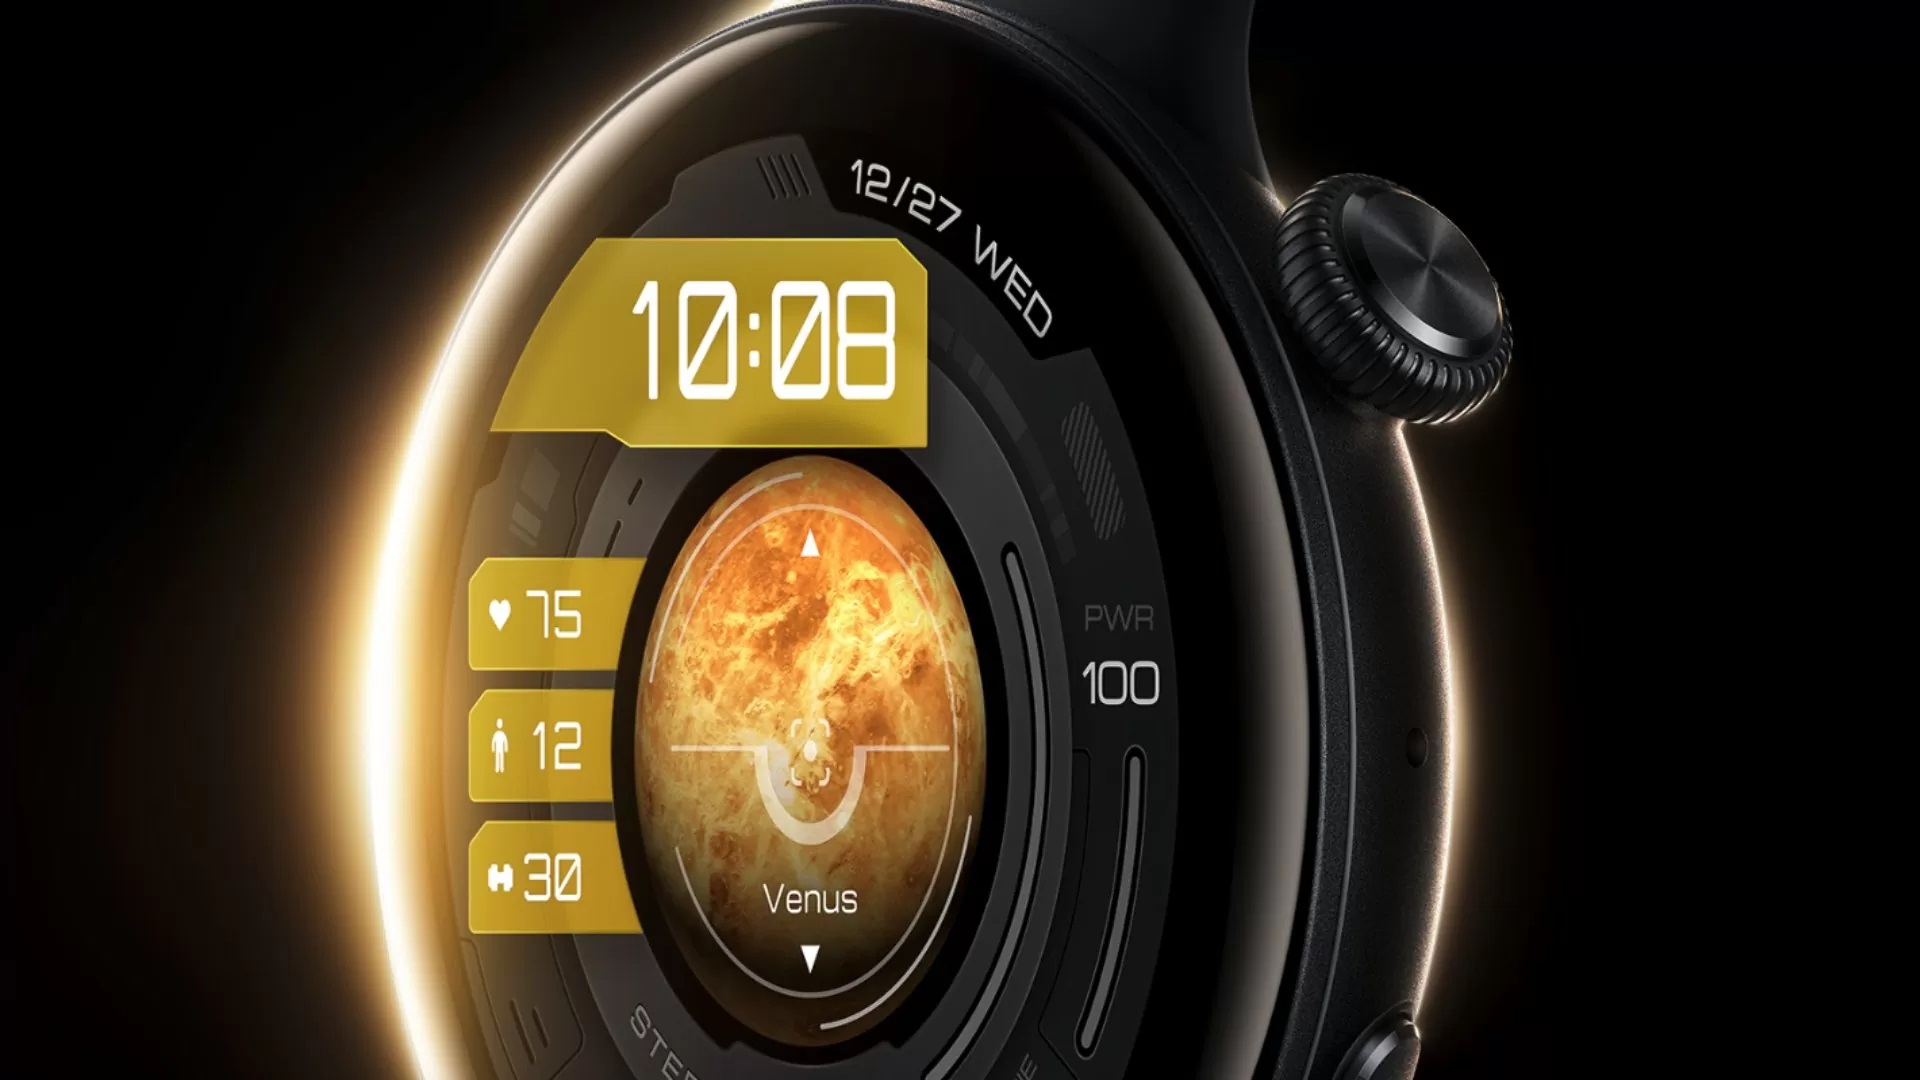 The iQOO Watch smartwatch will get eSIM support and up to 16 days of battery life